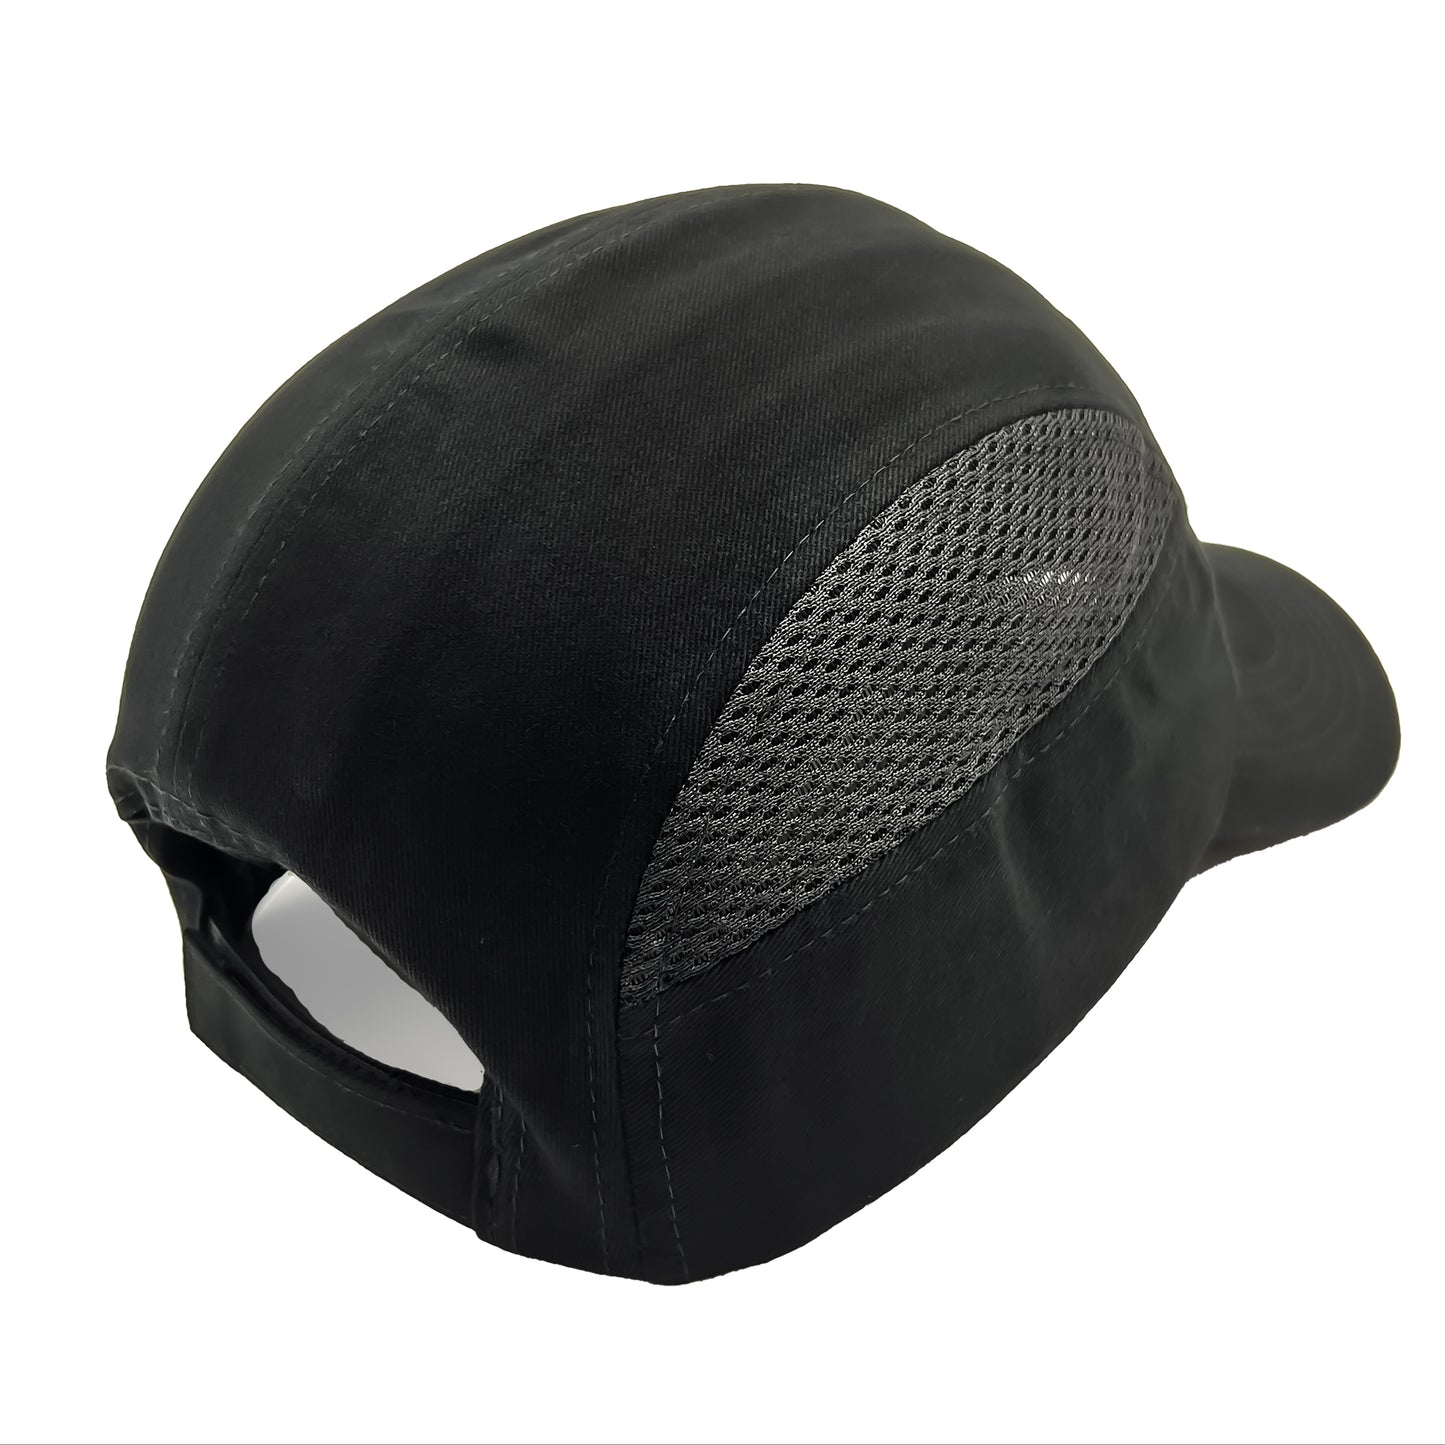 Black Baseball Safety Bump Cap - Stylish Hard Hat with Breathable Mesh Ventilation, Impact Resistant ABS Shell Insert and Padded Foam Lining for Head Protection